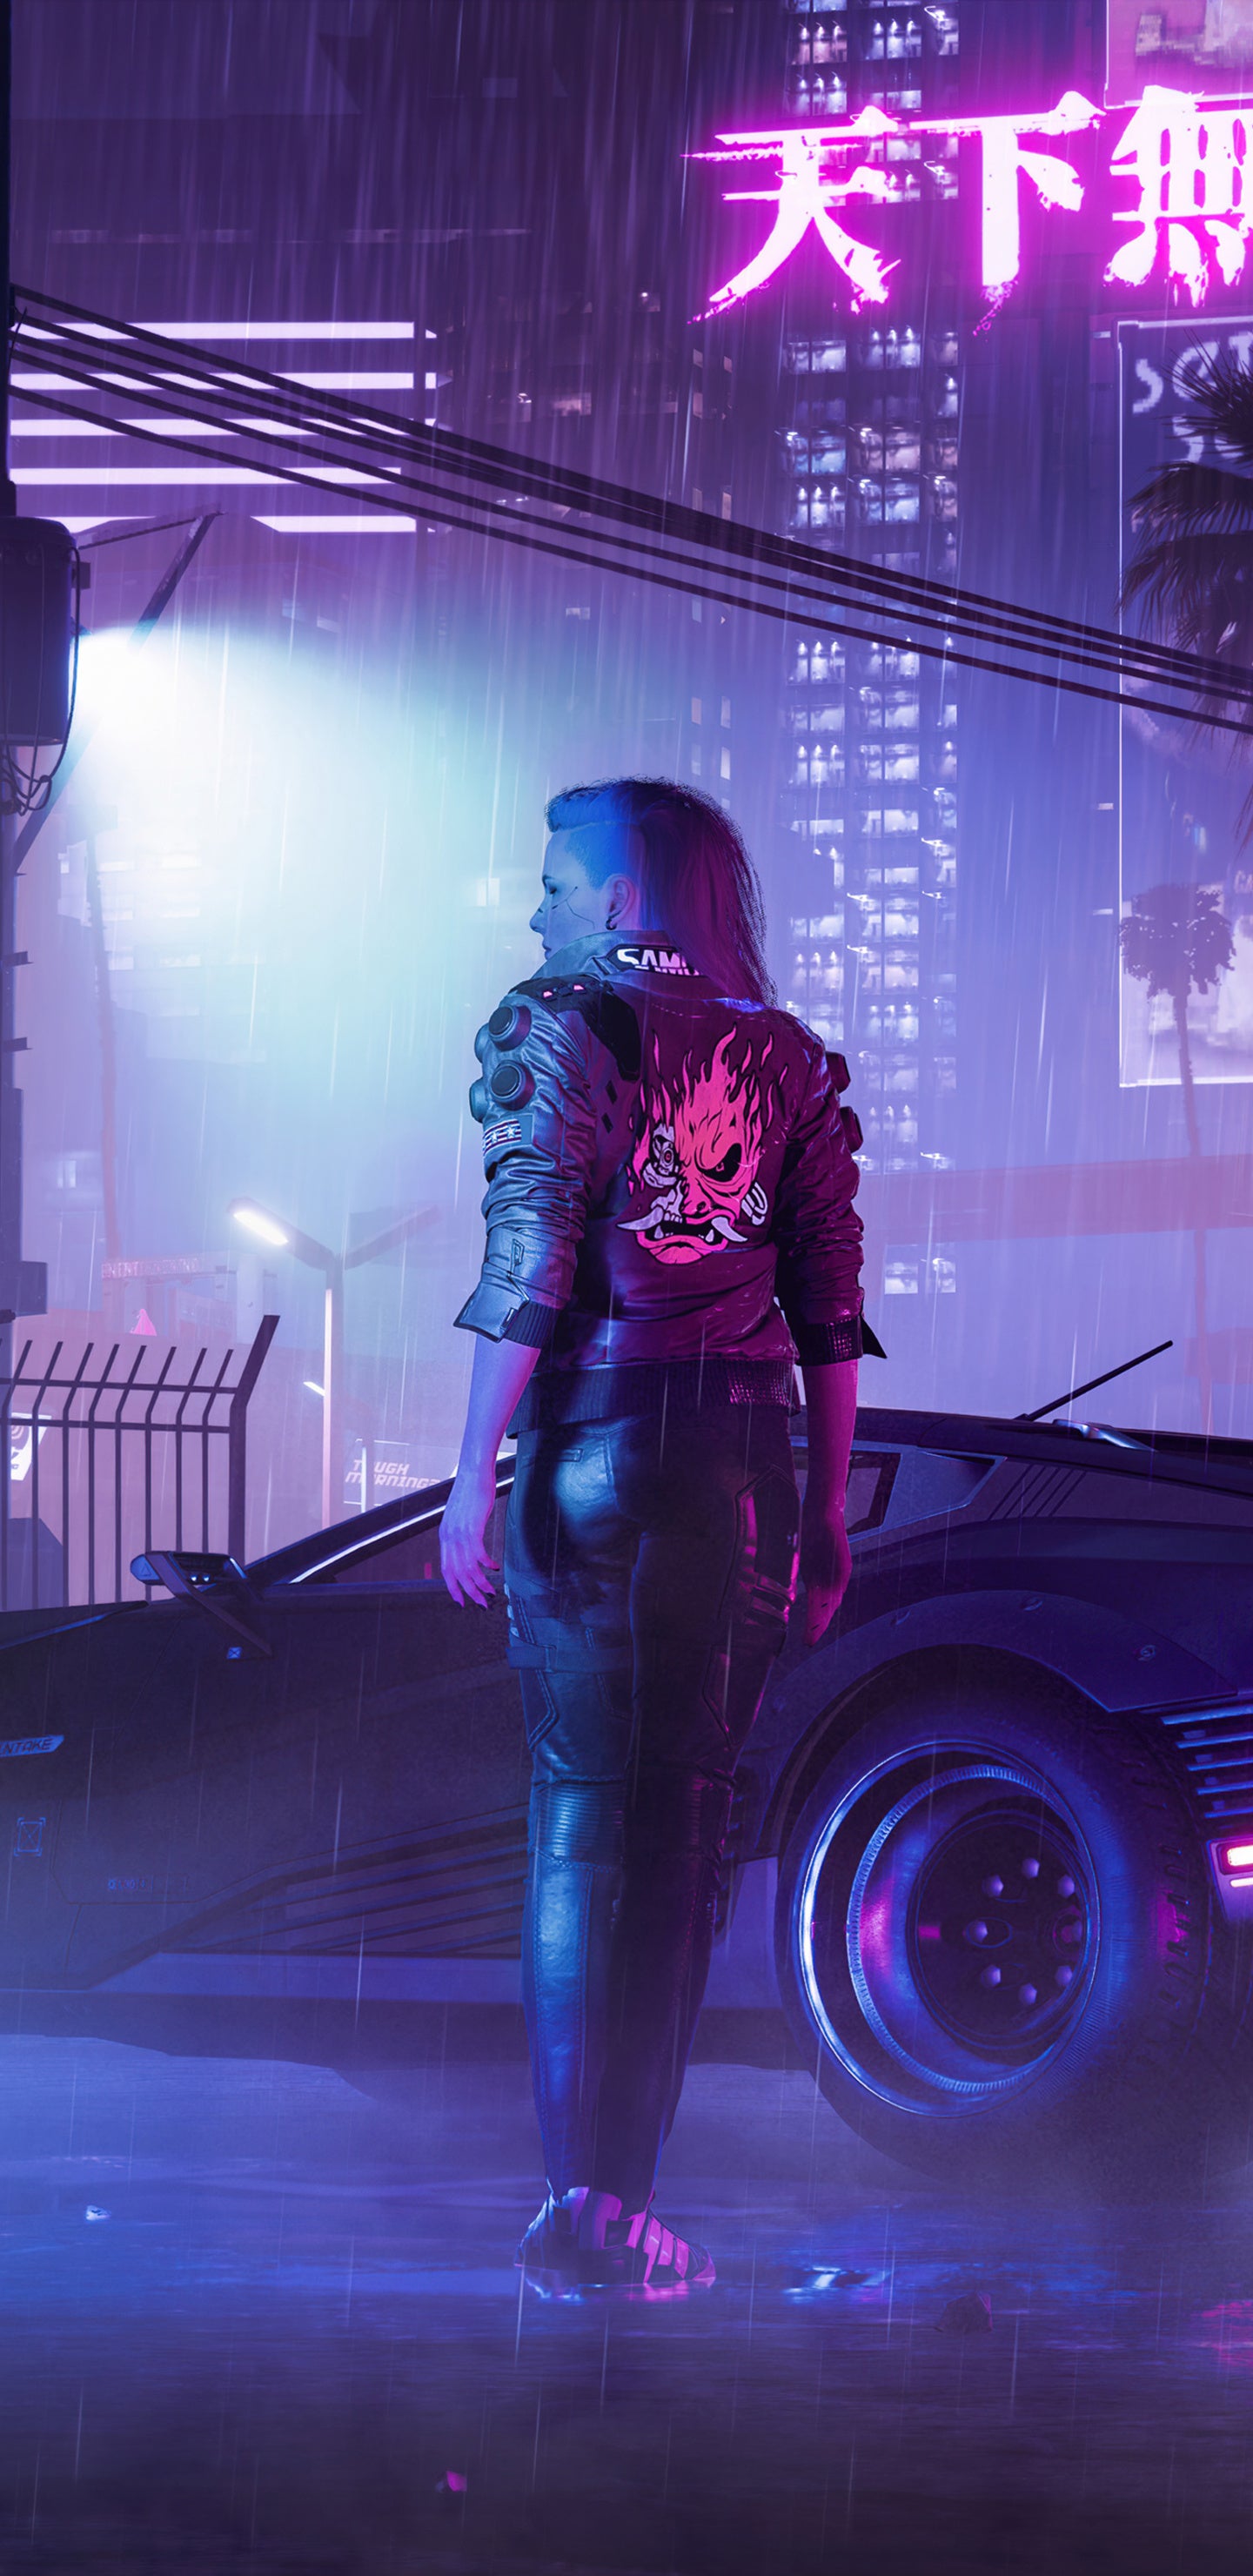 Cyberpunk 2077 Phone Wallpaper by em3rsy - Mobile Abyss